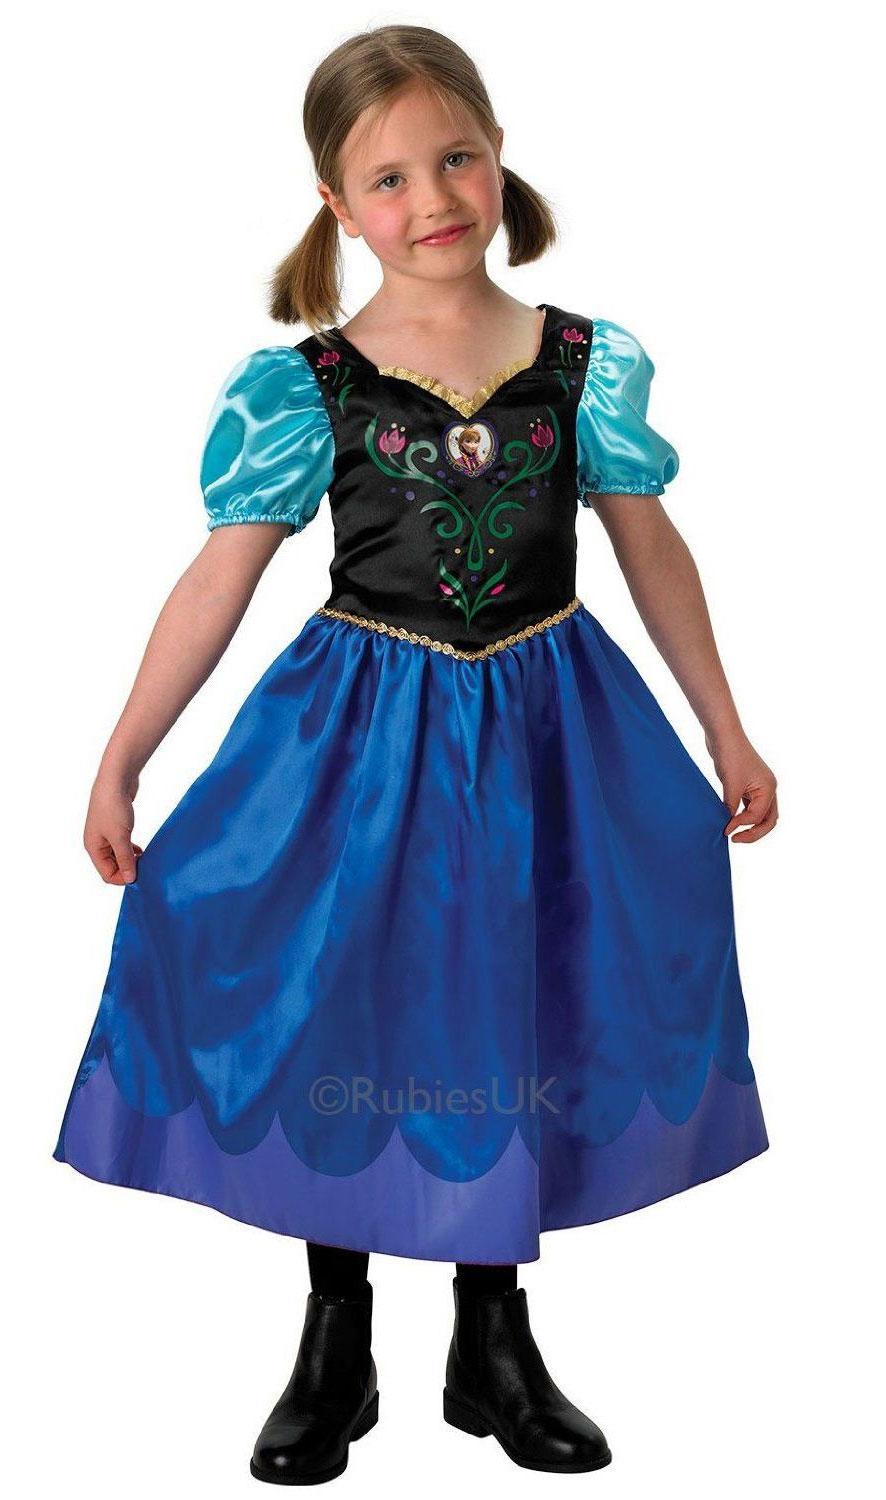 Fully licensed Disney's Anna fancy dress costume from the hit movies Frozen. By Rubies, item 889543 it's available here at Karnival Costumes online party shop